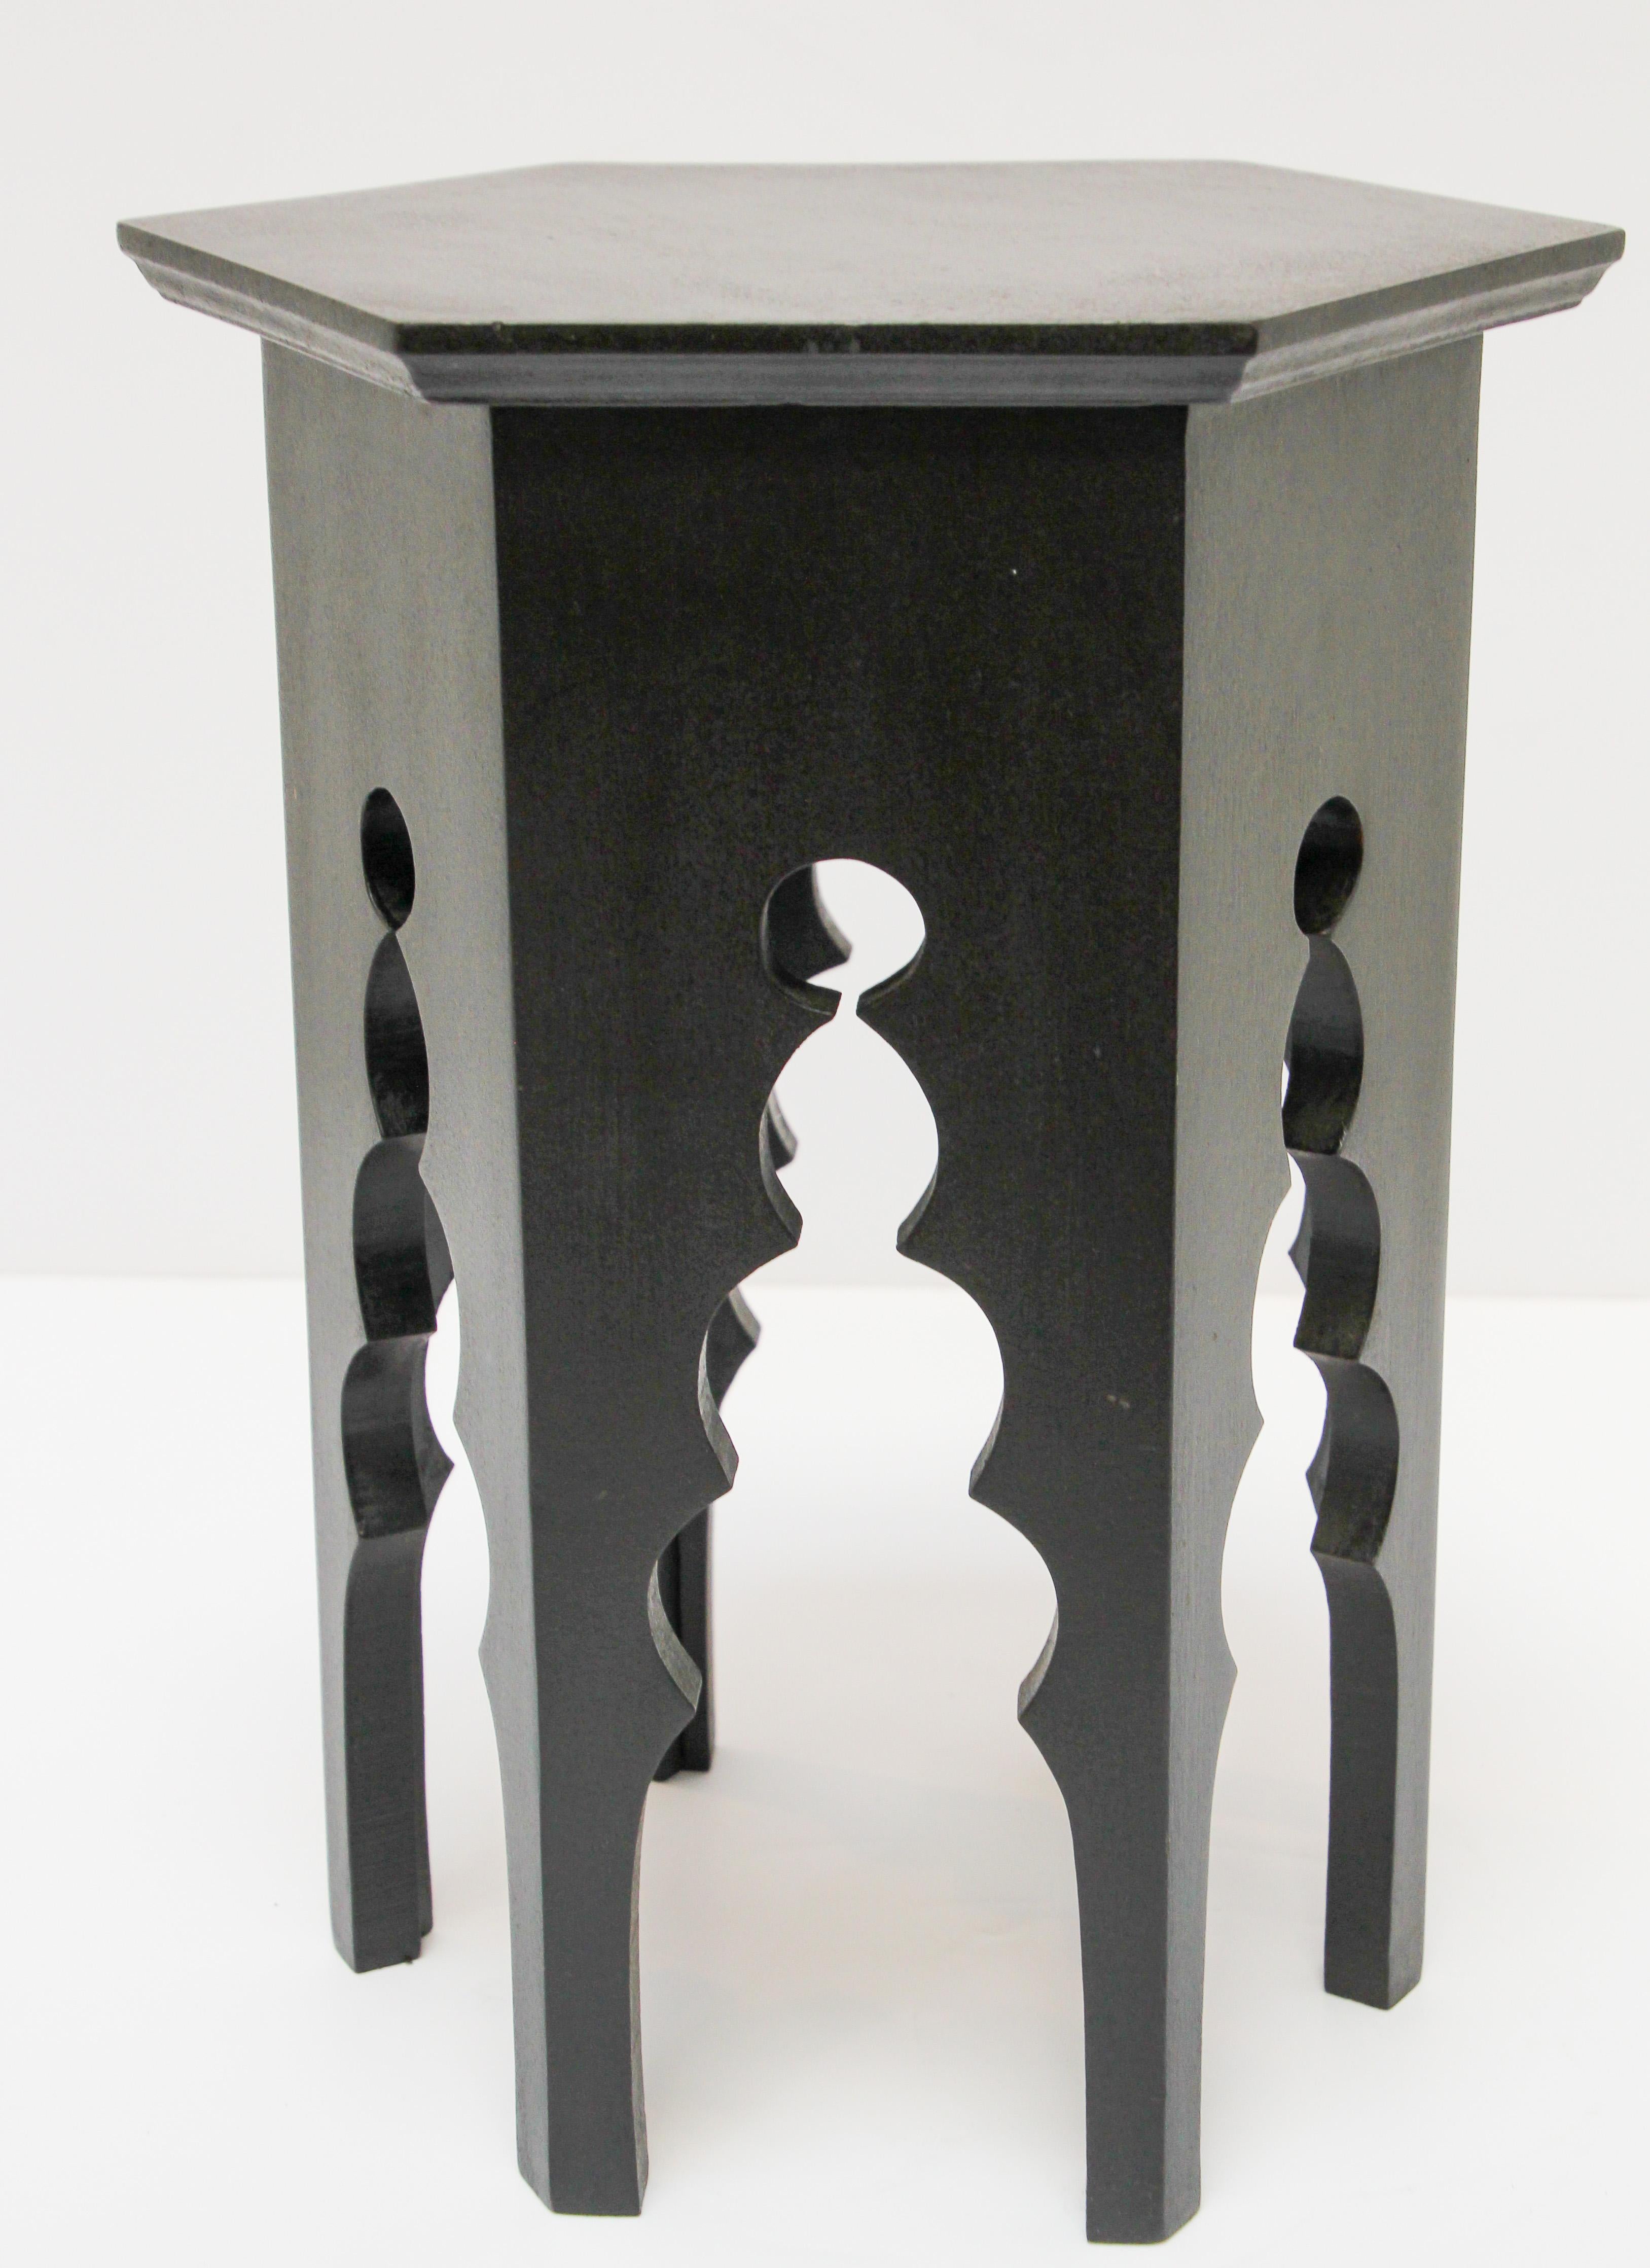 Levantine Hexagonal occasional side accent table with Moorish arches.
Moroccan style wood table refinished in black paint.
Very simple modern Moroccan contemporary design.
Will work with any modern or traditional decor.


  